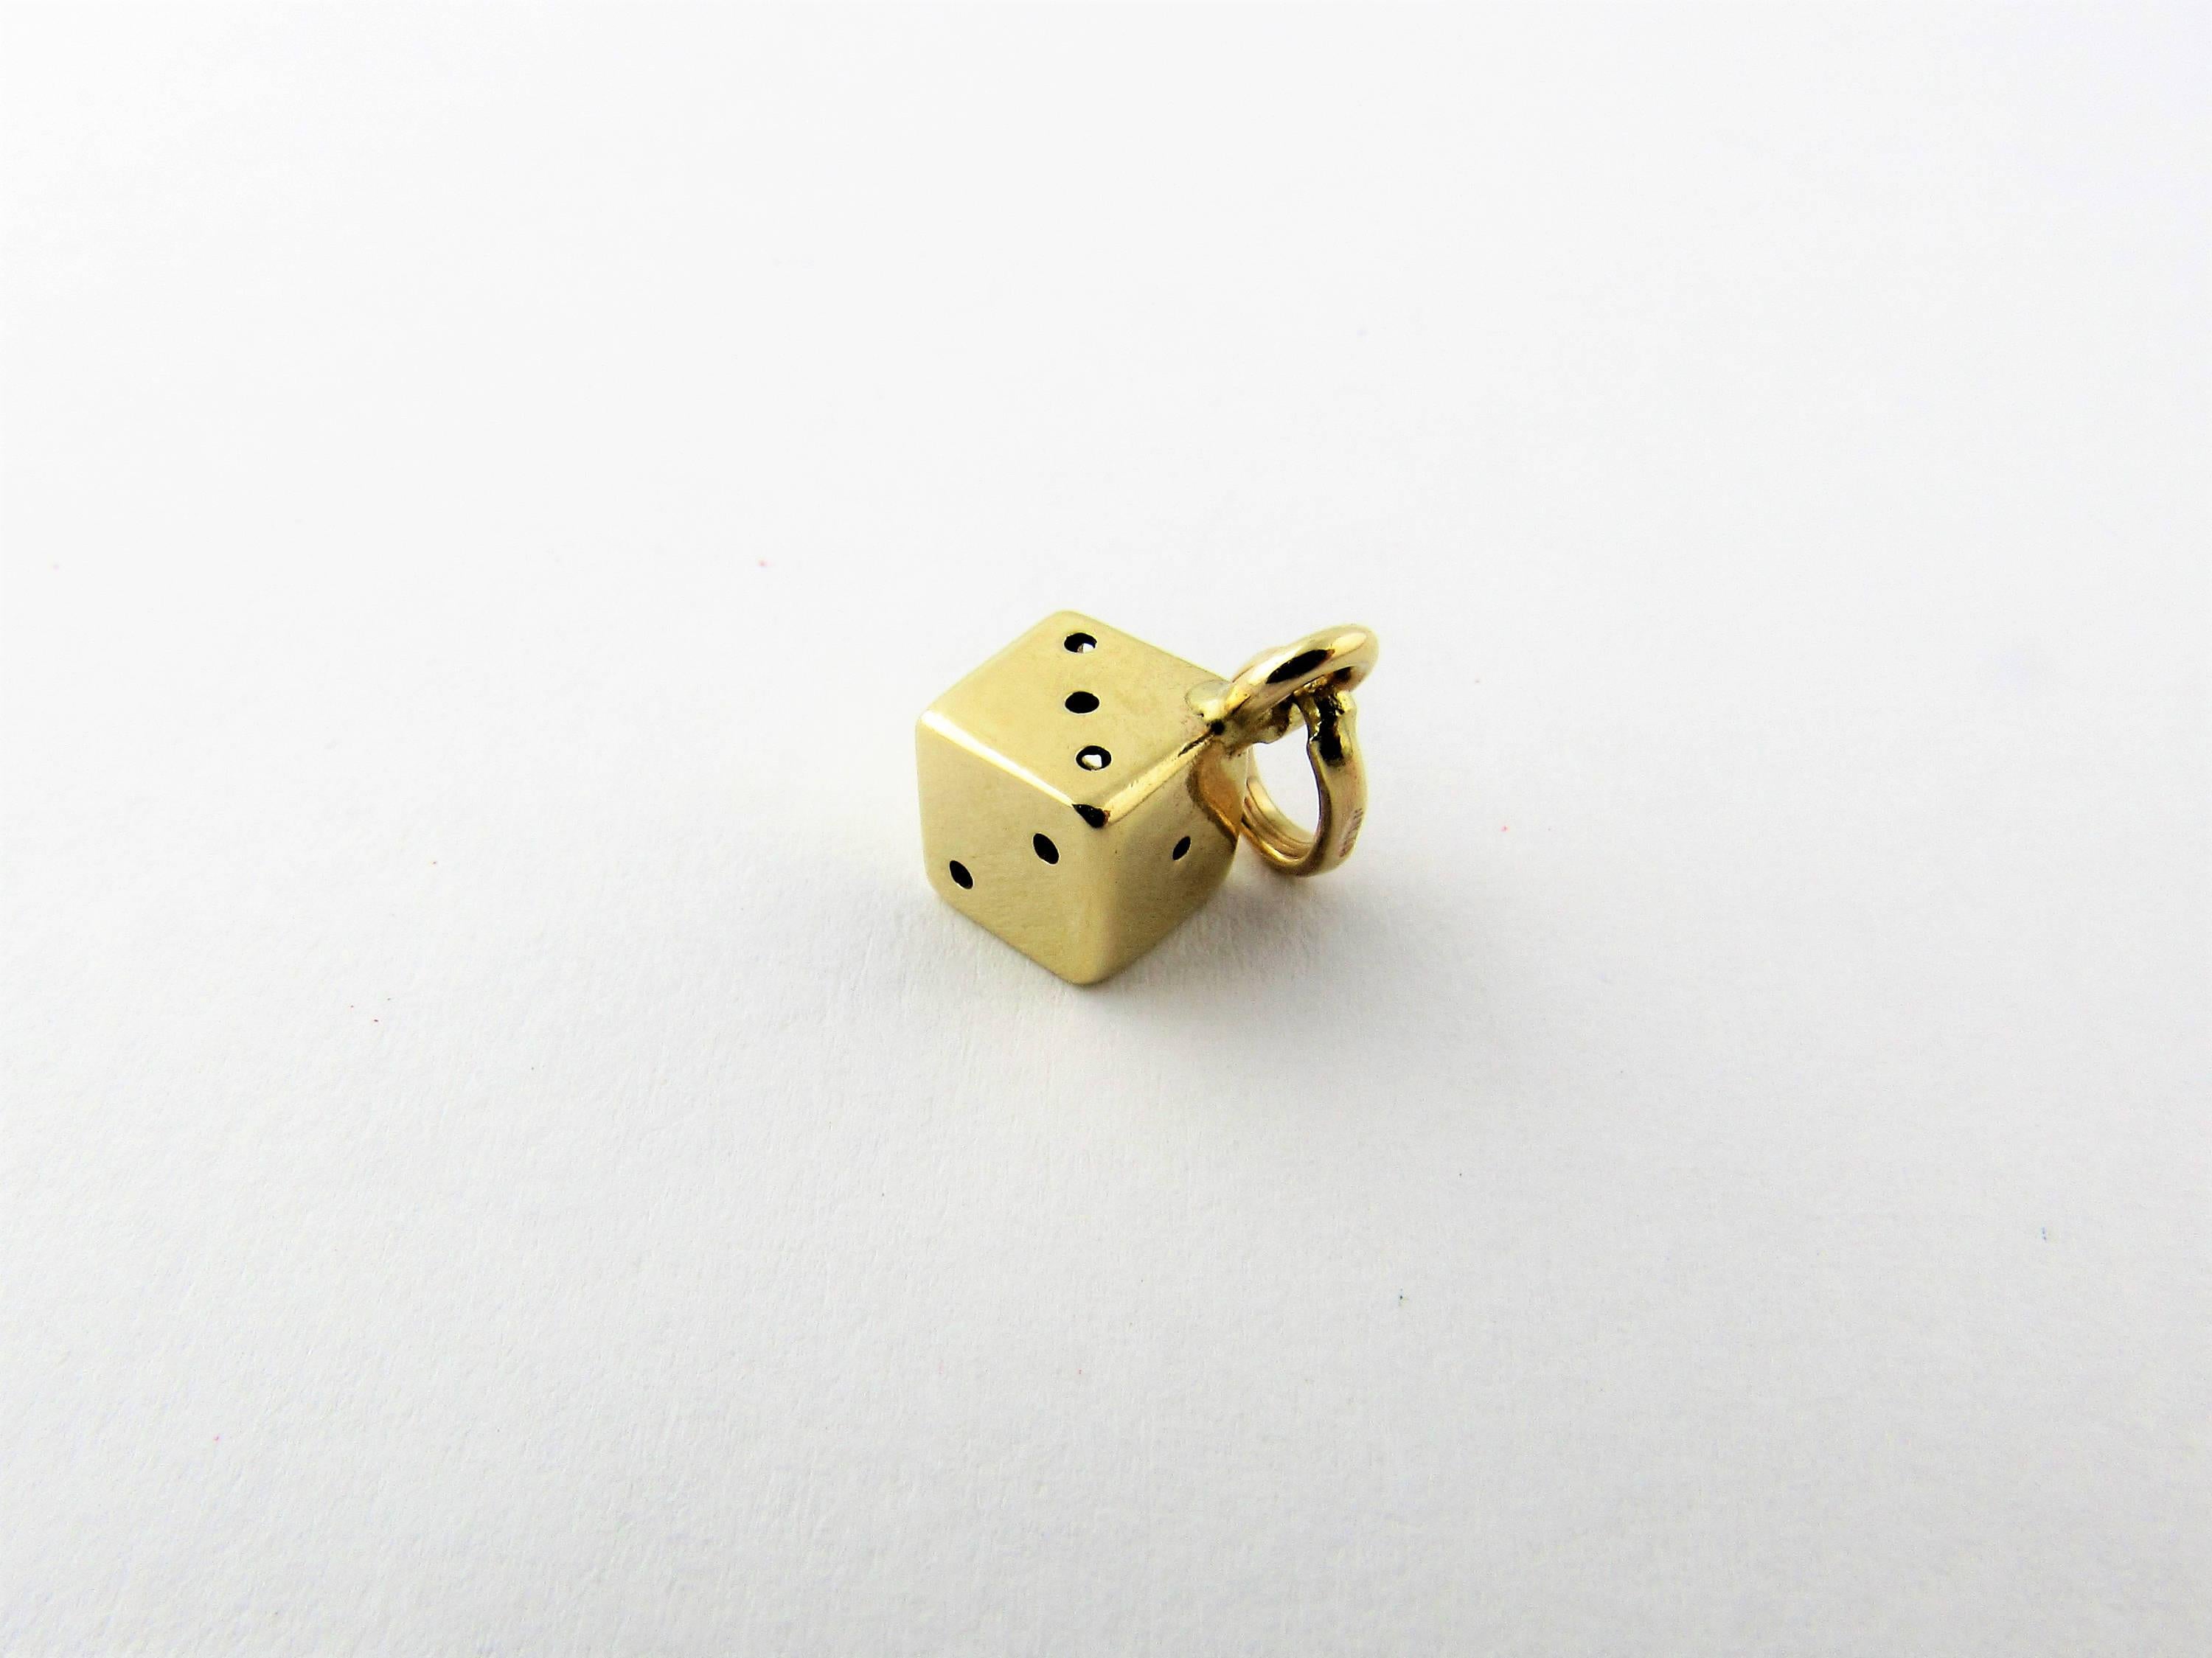 Vintage 14 Karat Yellow Gold Dice Charm

Roll the dice!

This lucky charm features a single die in meticulously detailed 14K yellow gold.

Size: approx 4 mm x 4 mm (actual charm)

Charm hangs approx 12 mm from the top of the loop.

Weight: 0.5 dwt.